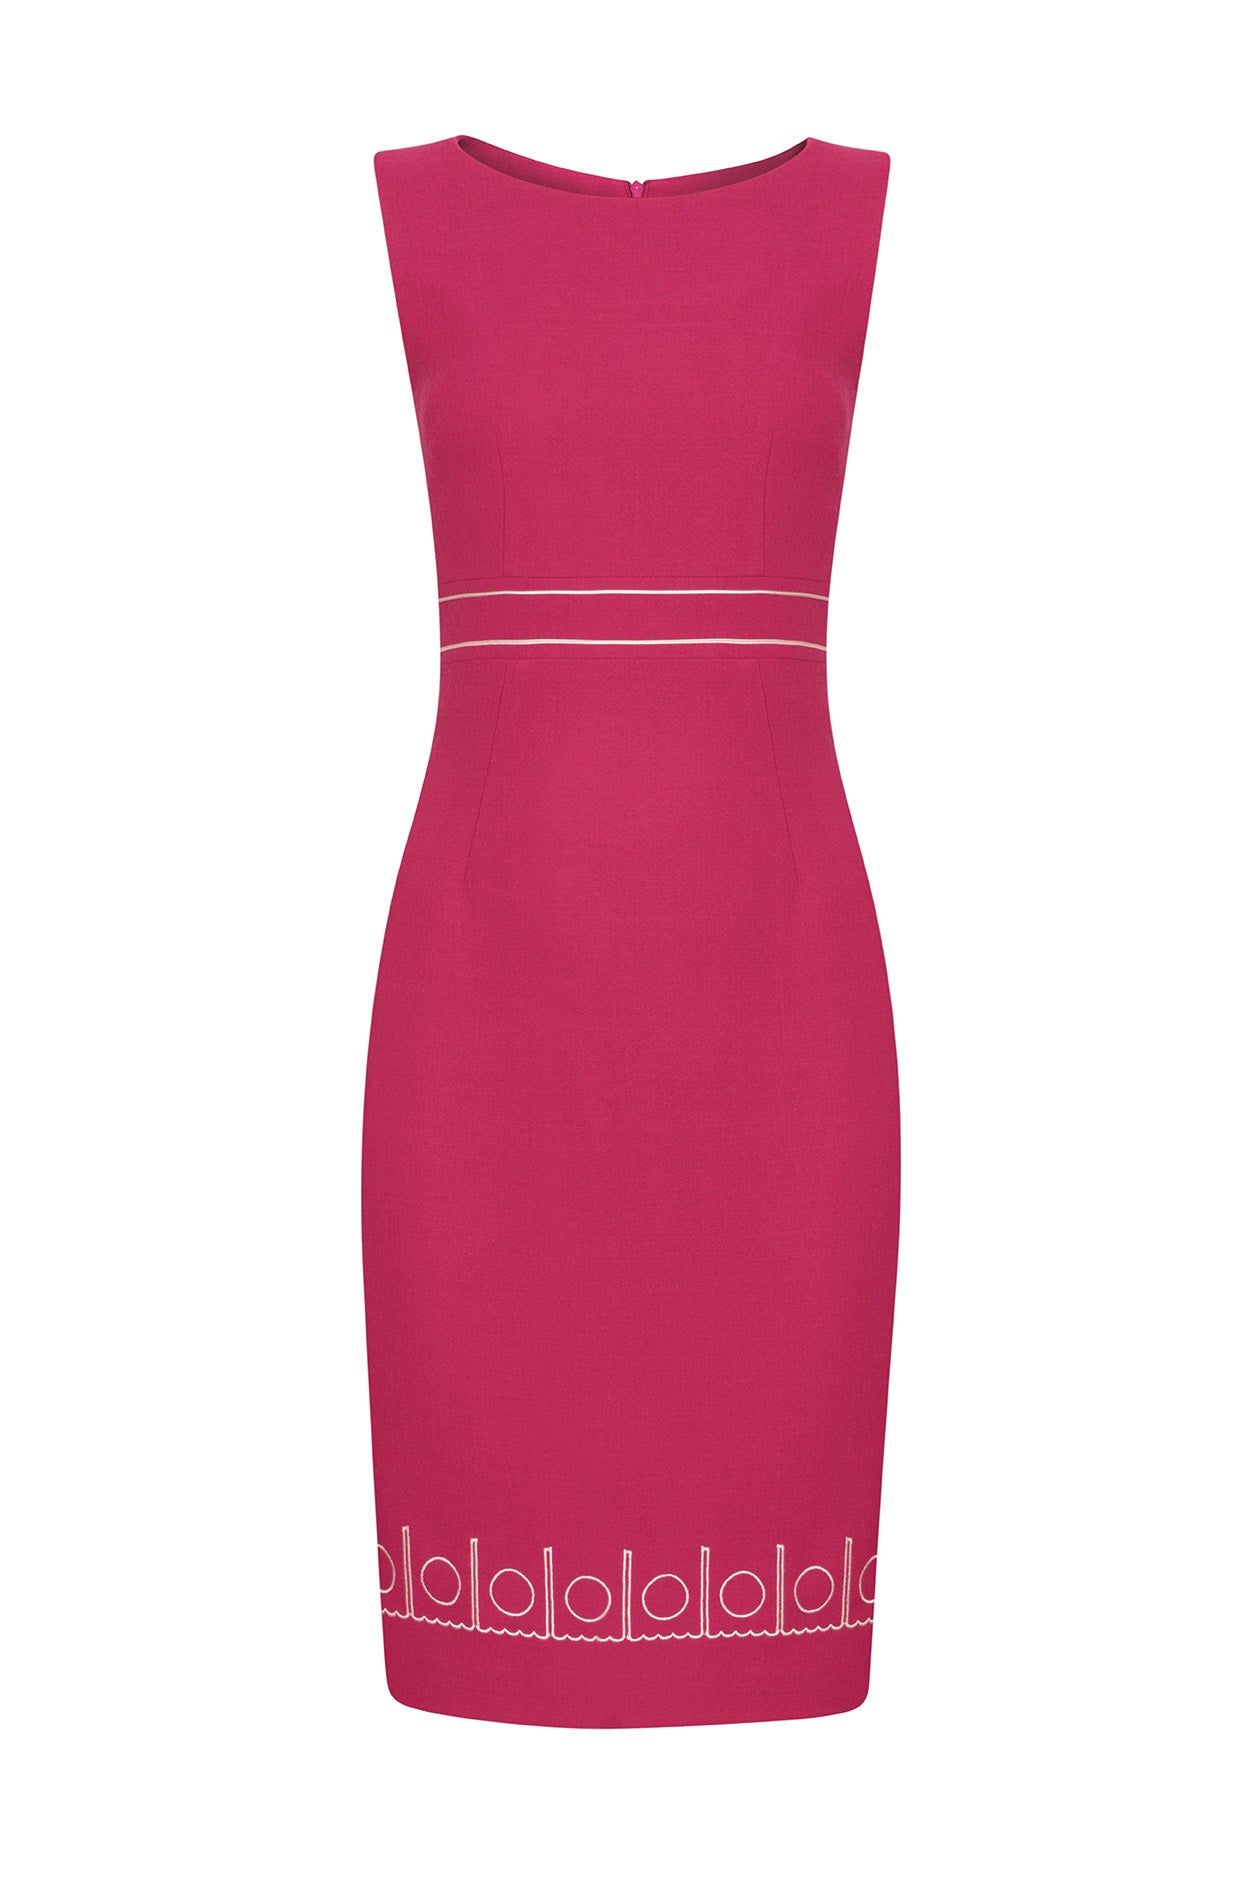 Sleeveless Shift Dress in Berry Pink with Ivory Embroidered Border - Aude